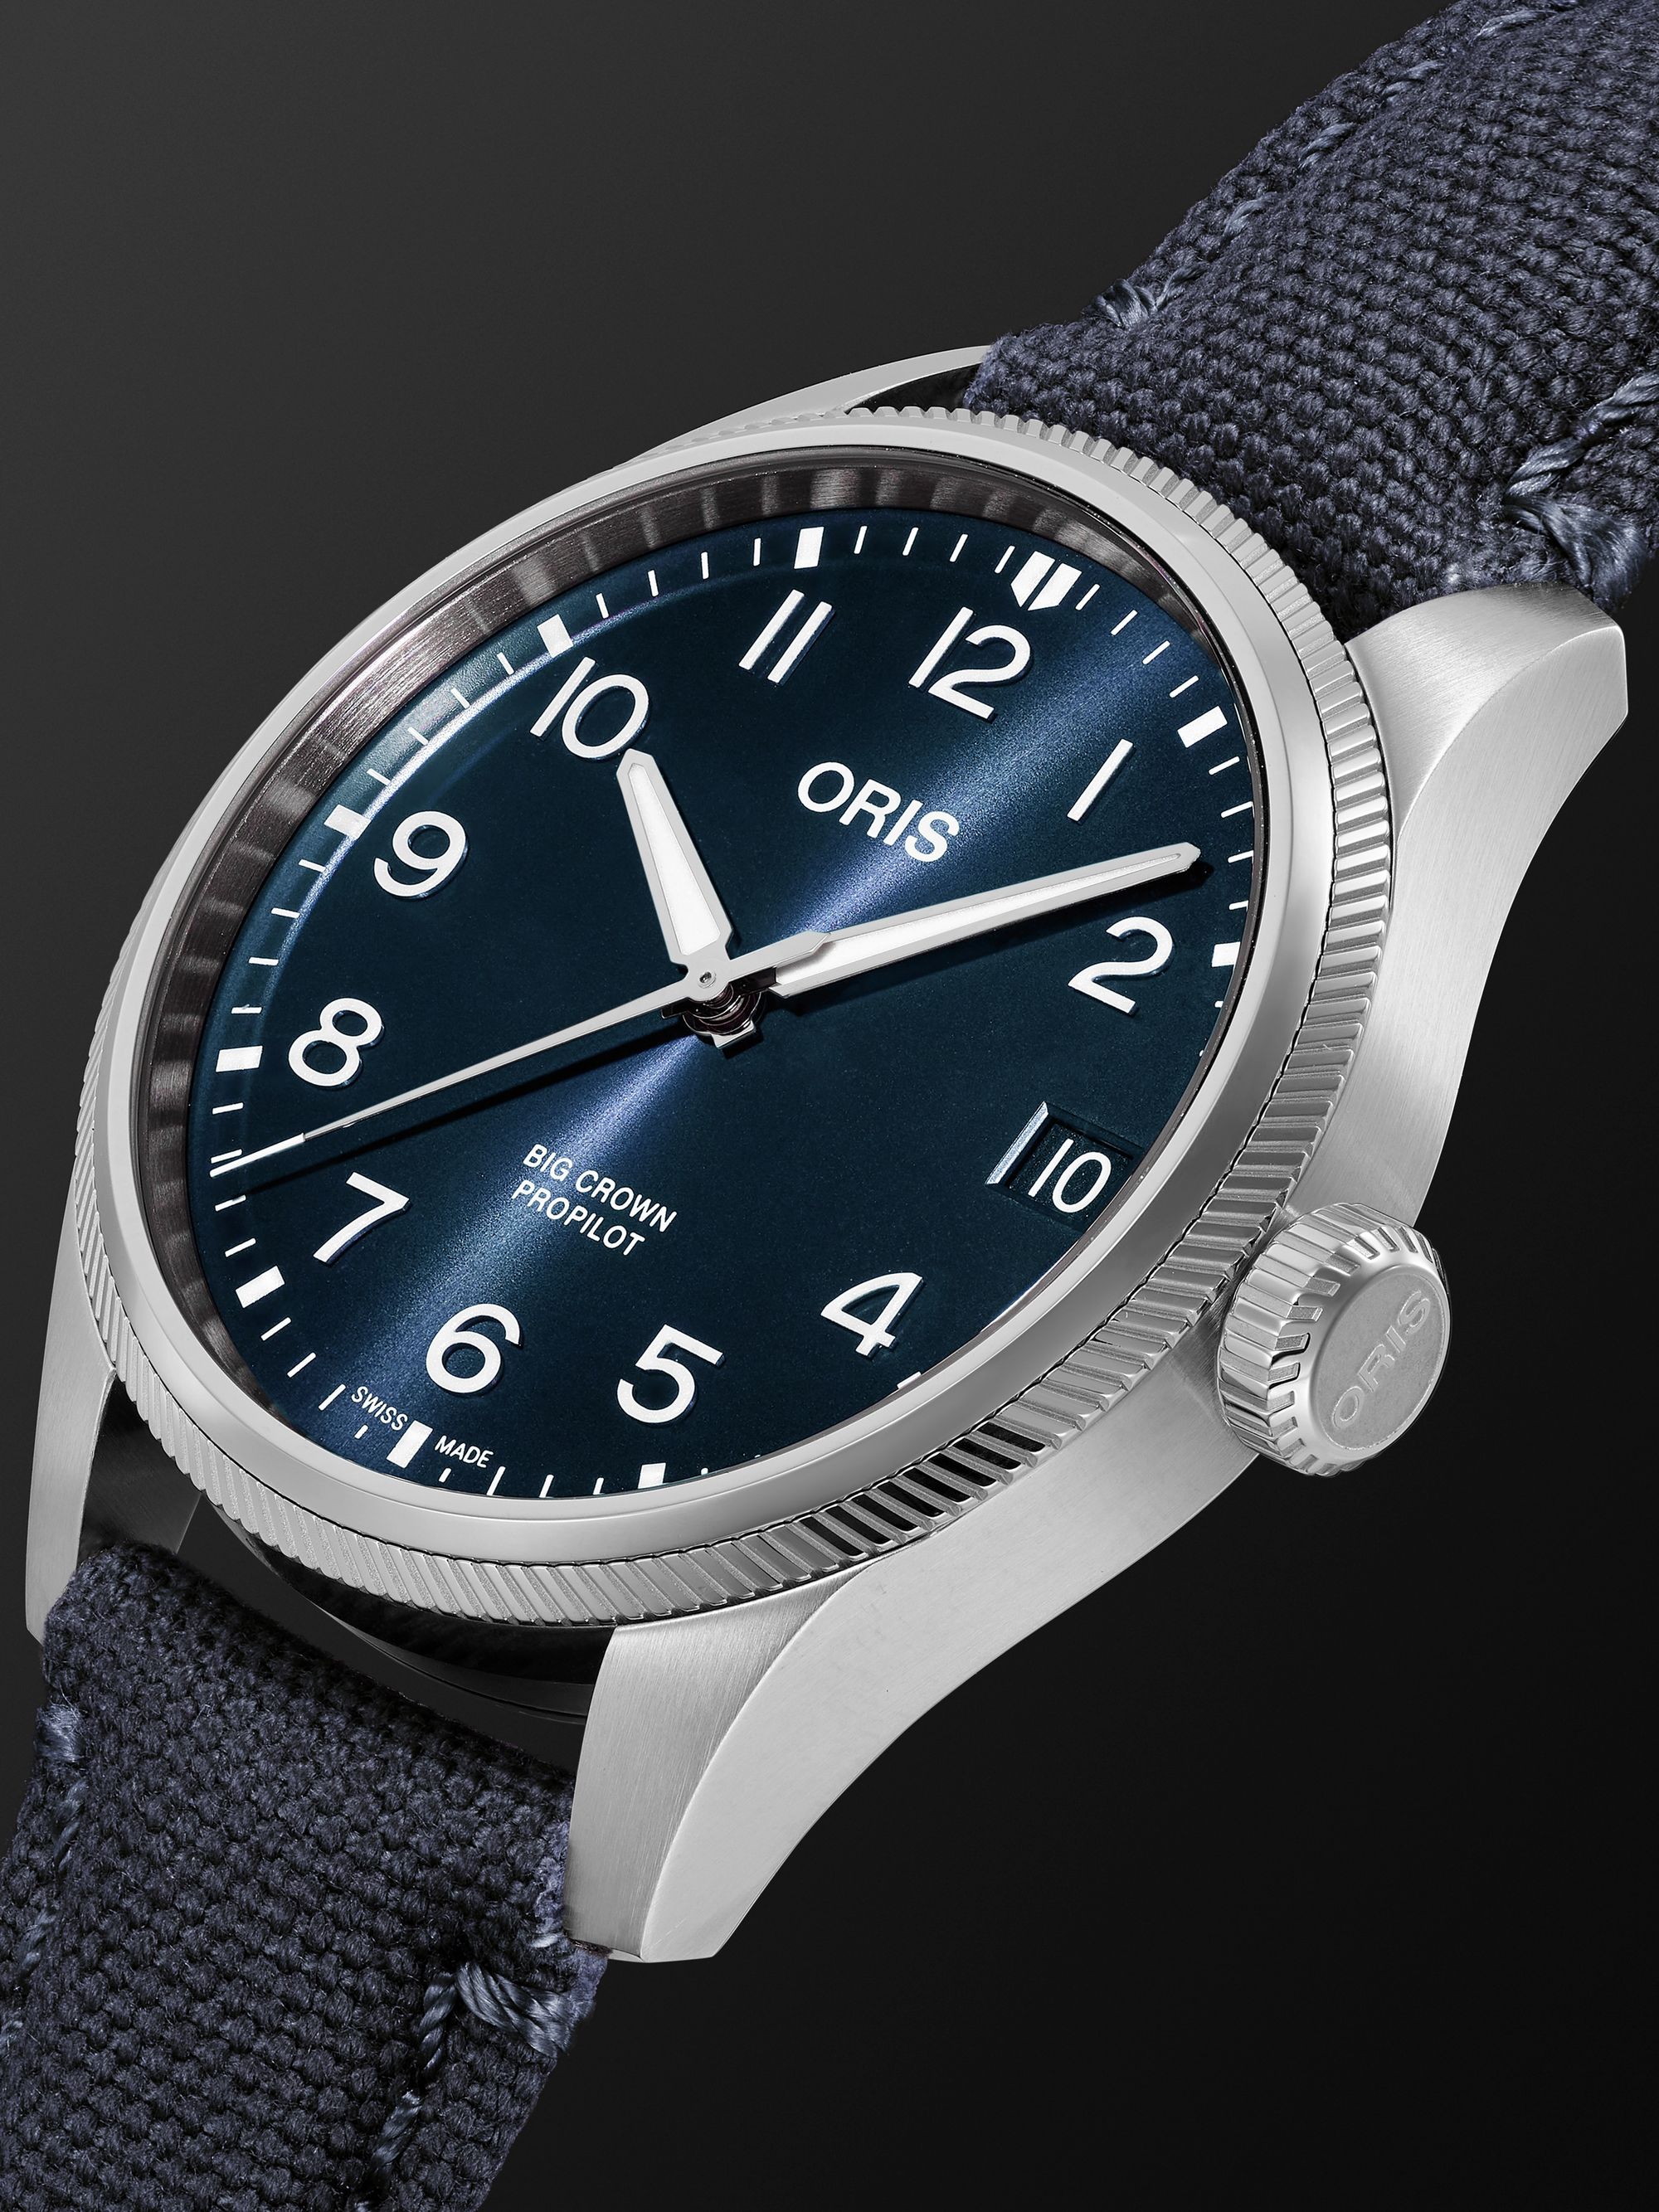 ORIS Big Crown ProPilot Big Date Automatic 41mm Stainless Steel and Canvas Watch, Ref. No. 01 751 7761 4065-07 3 20 05LC